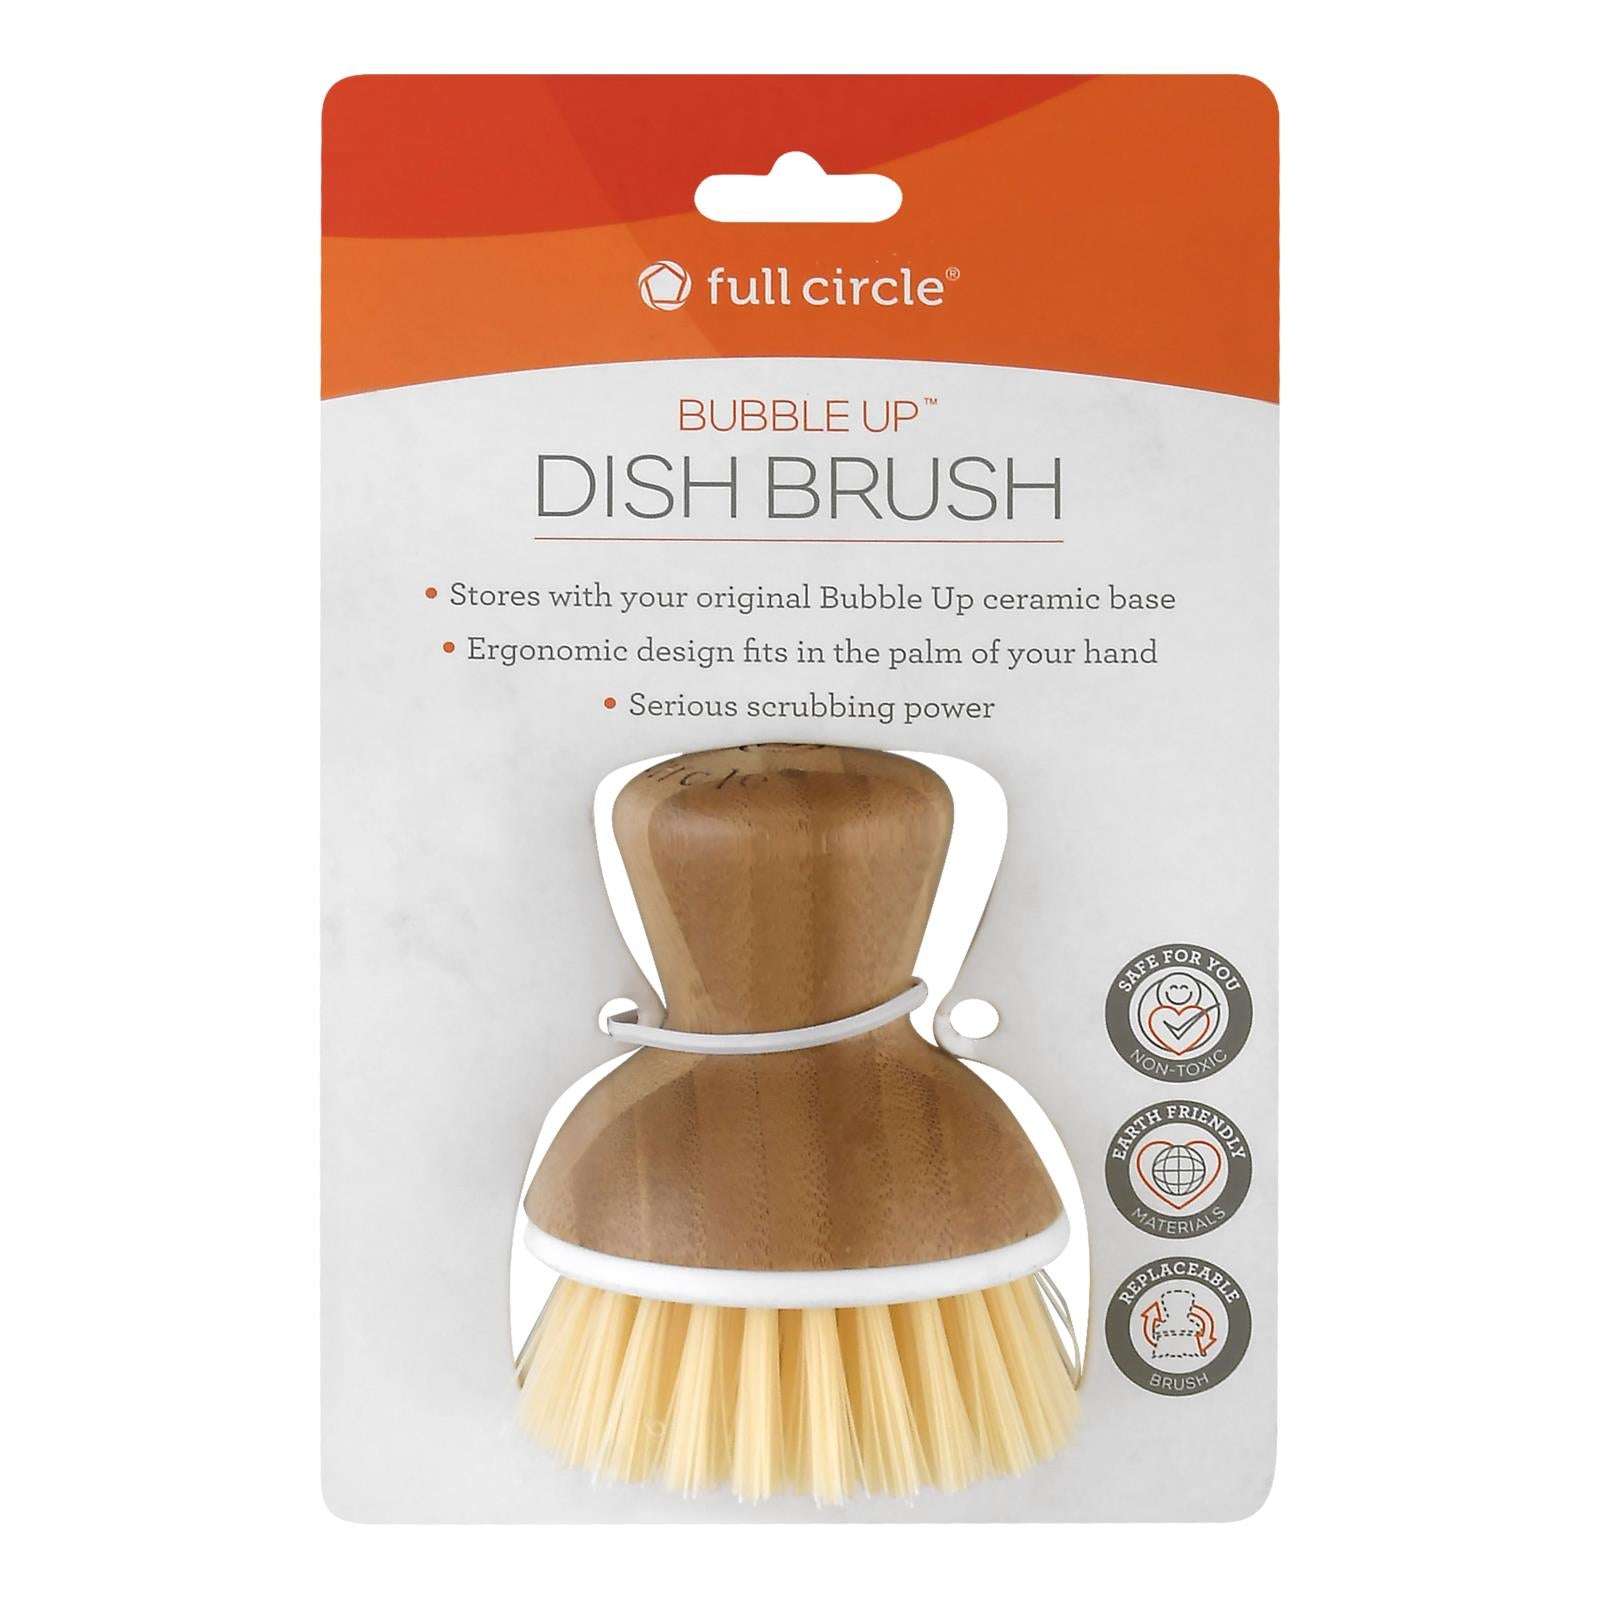 Full Circle Home - Bubble Up Dish Brush - White - Case of 6 - 1 Count